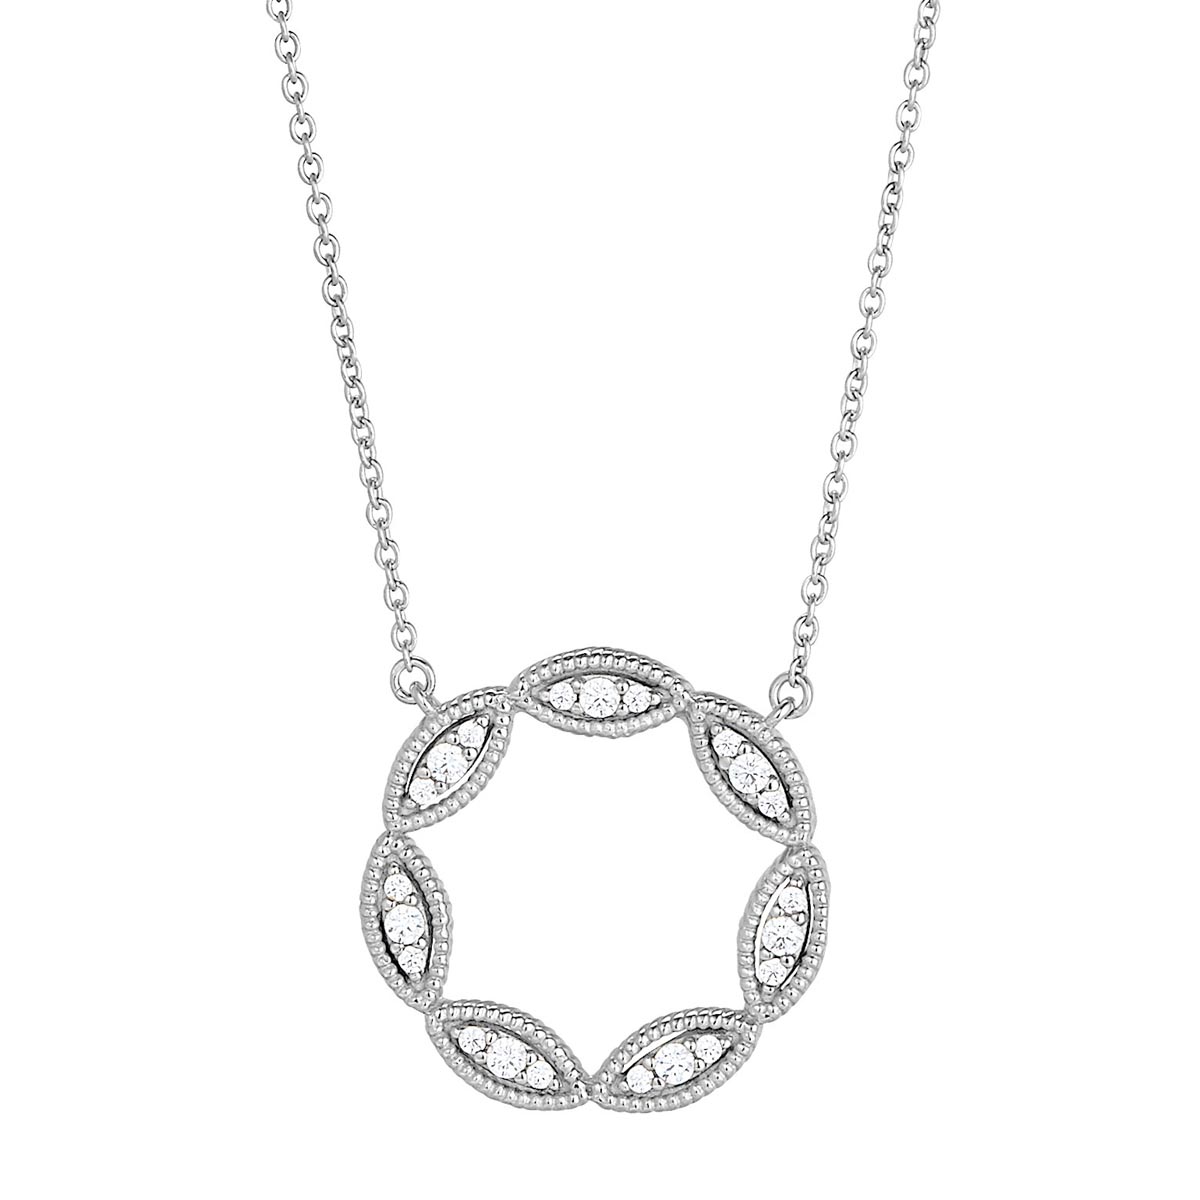 Cubic Zirconia Marquis Circle Necklace in Sterling Silver with Platinum Finish